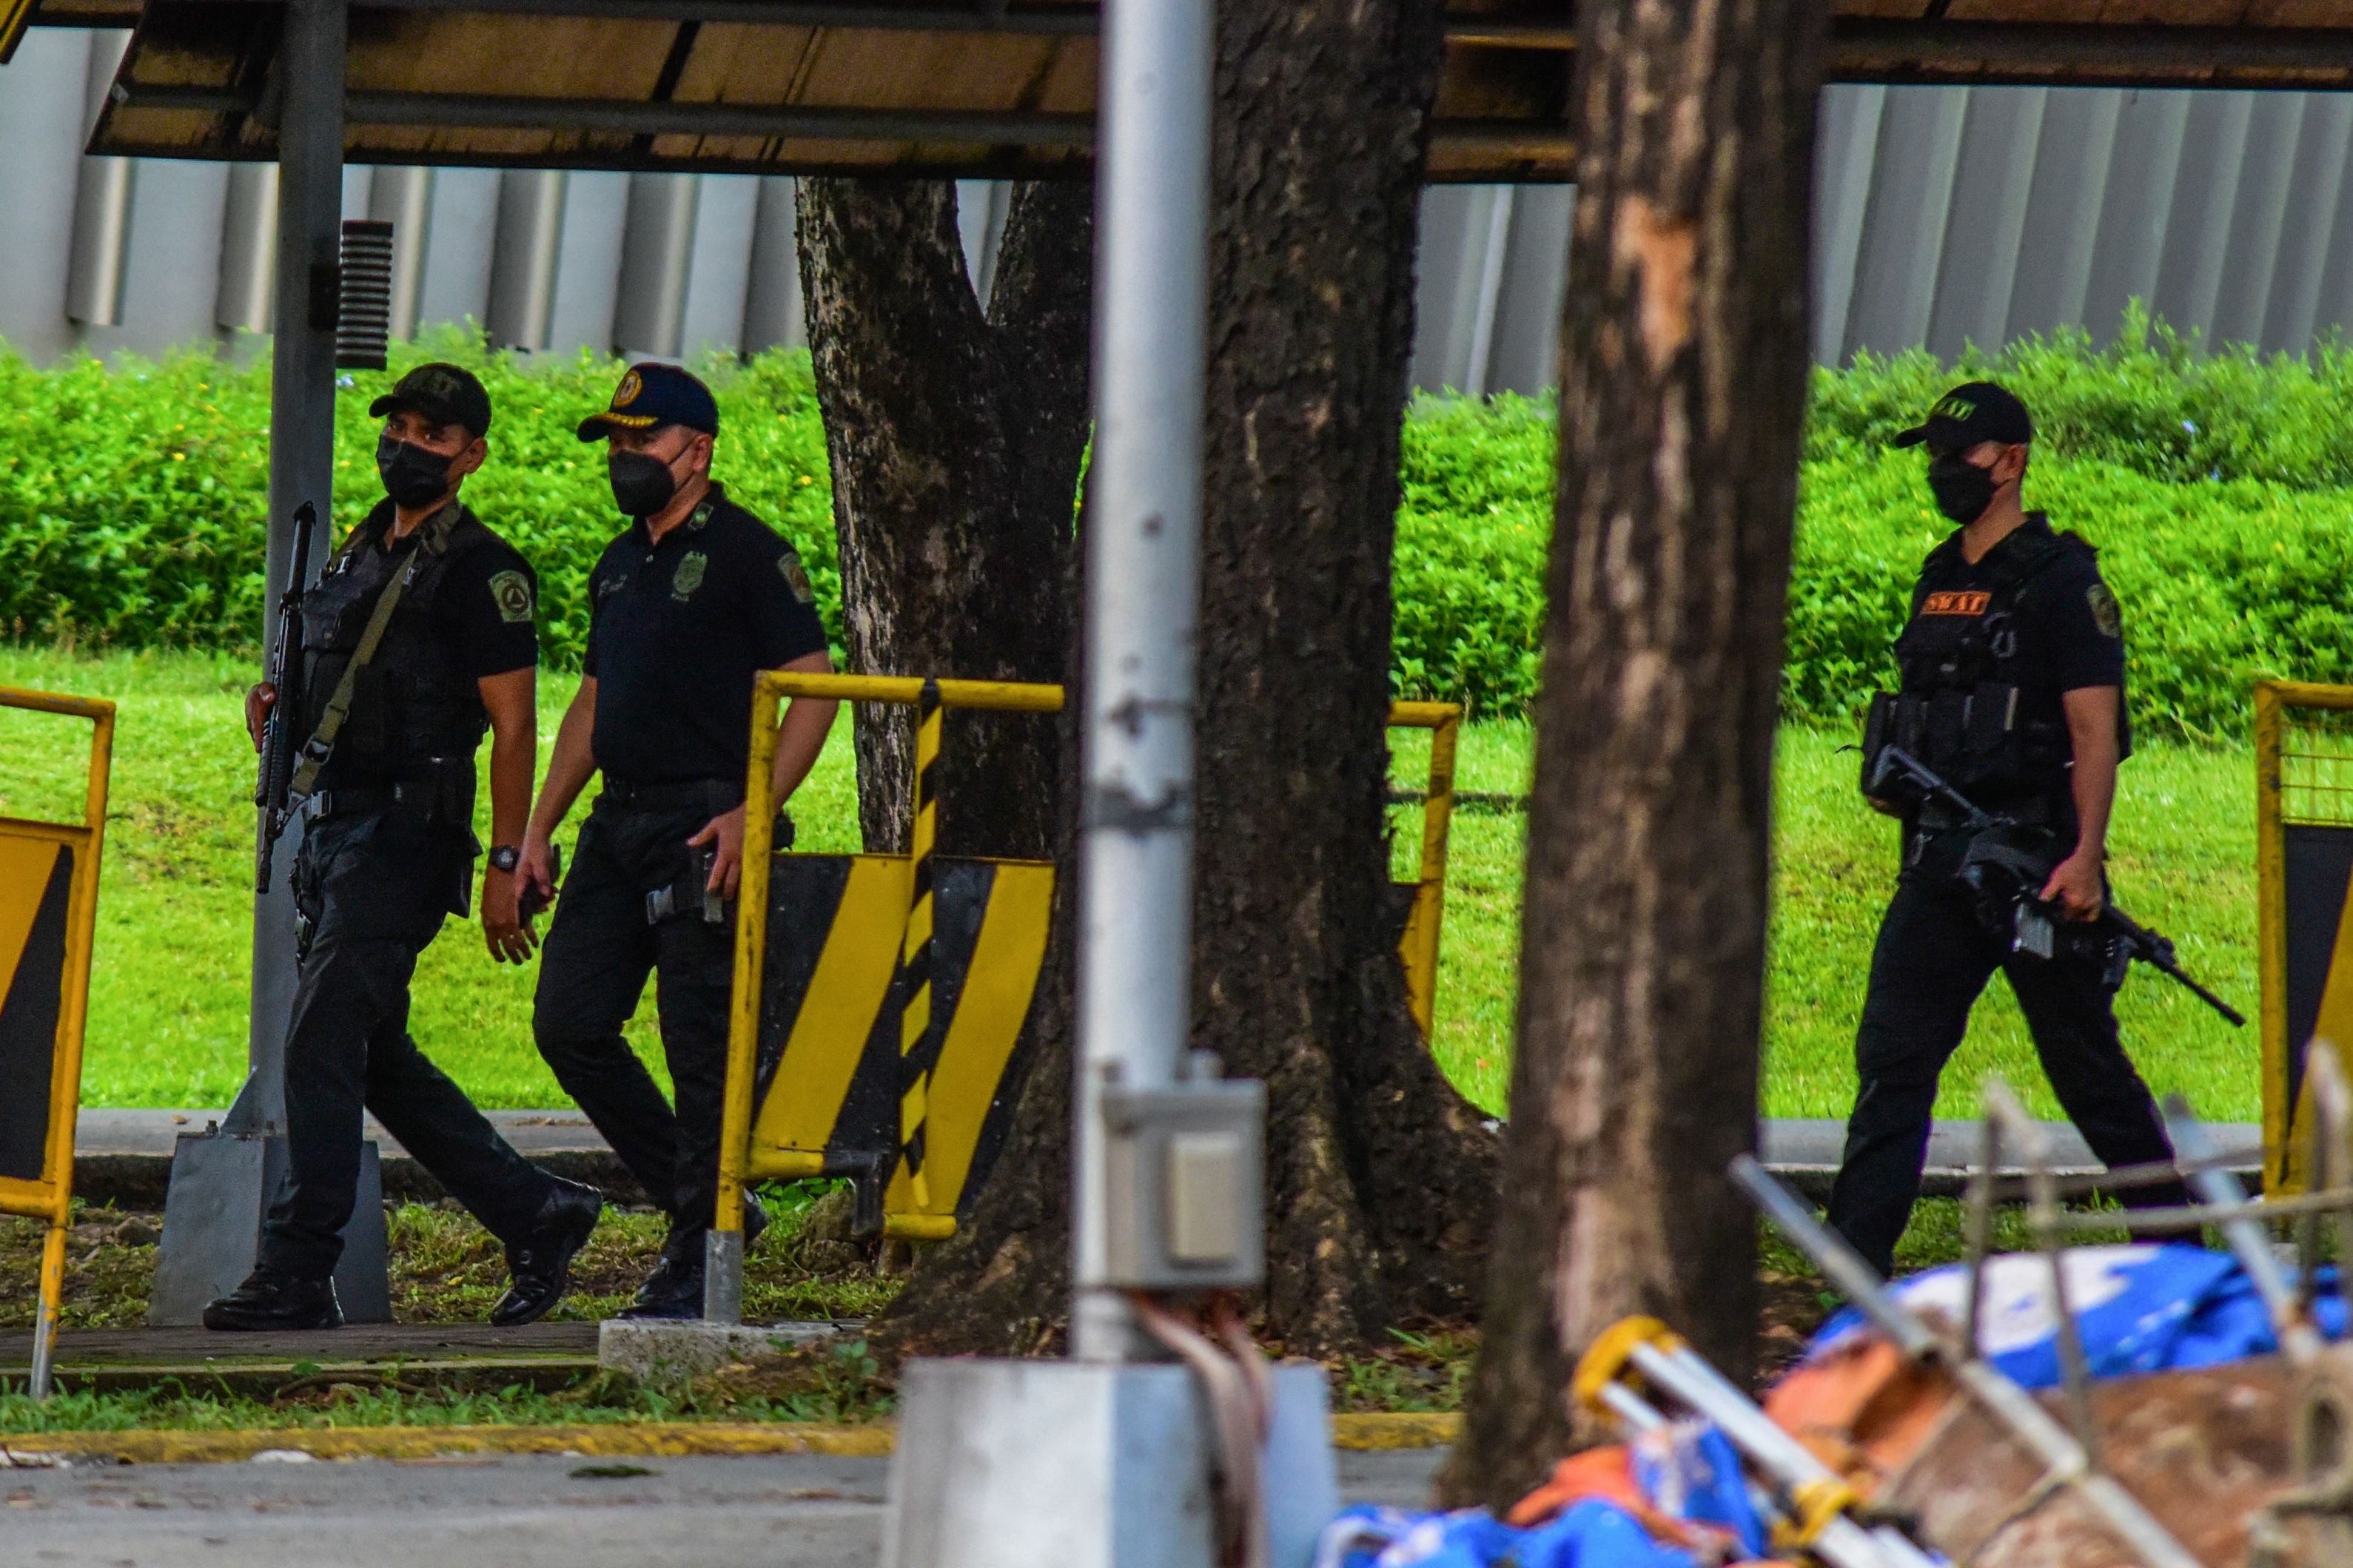 Police officers patrol the scene after three people were killed in a shooting at Ateneo de Manila University in Quezon City, suburban Manila, on 24 July